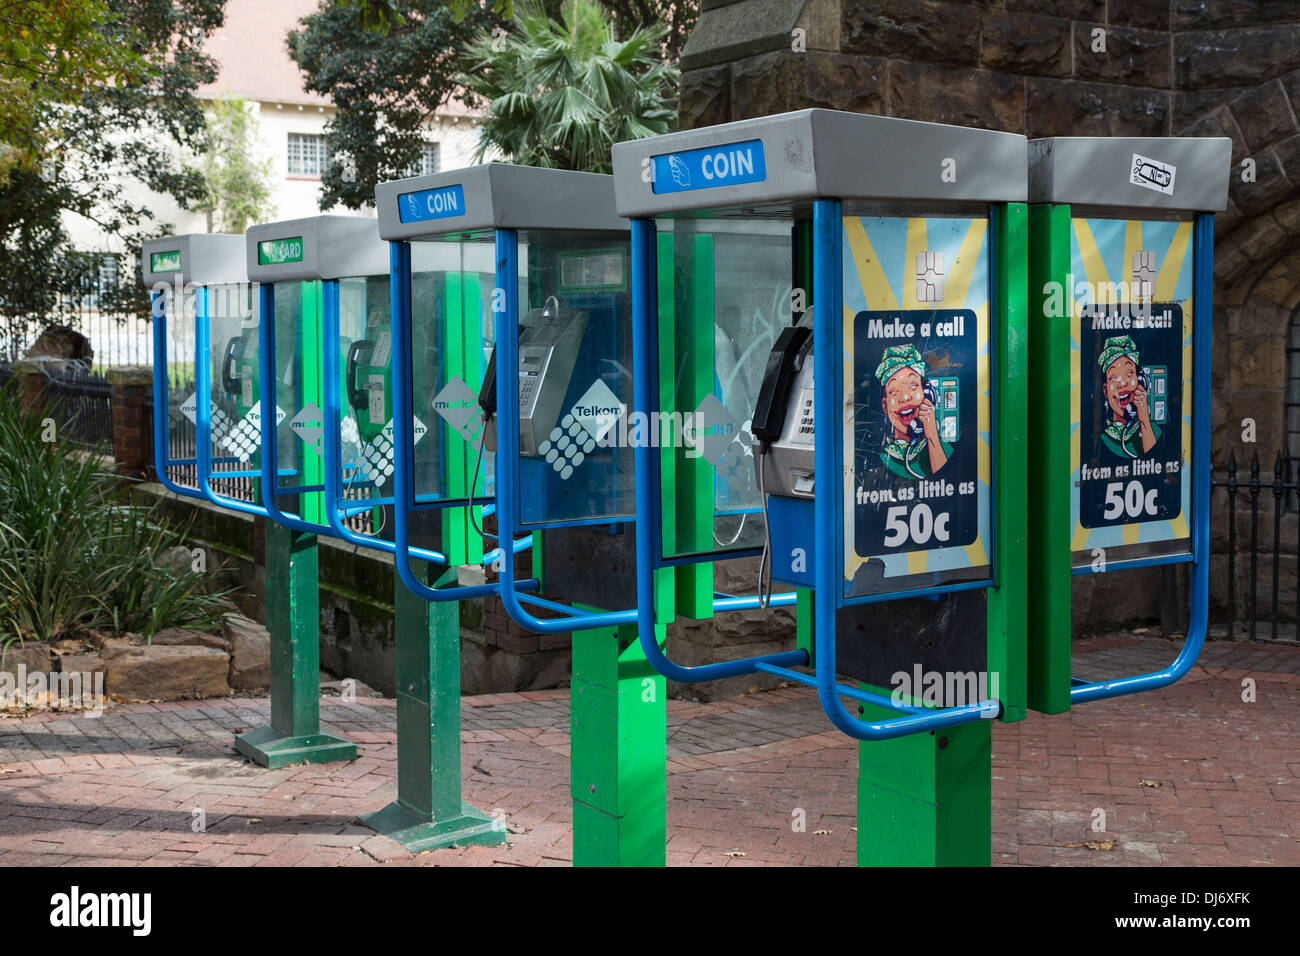 South Africa, Cape Town. Public, Coin-operated Pay Phones on the street, still in 2013. Stock Photo